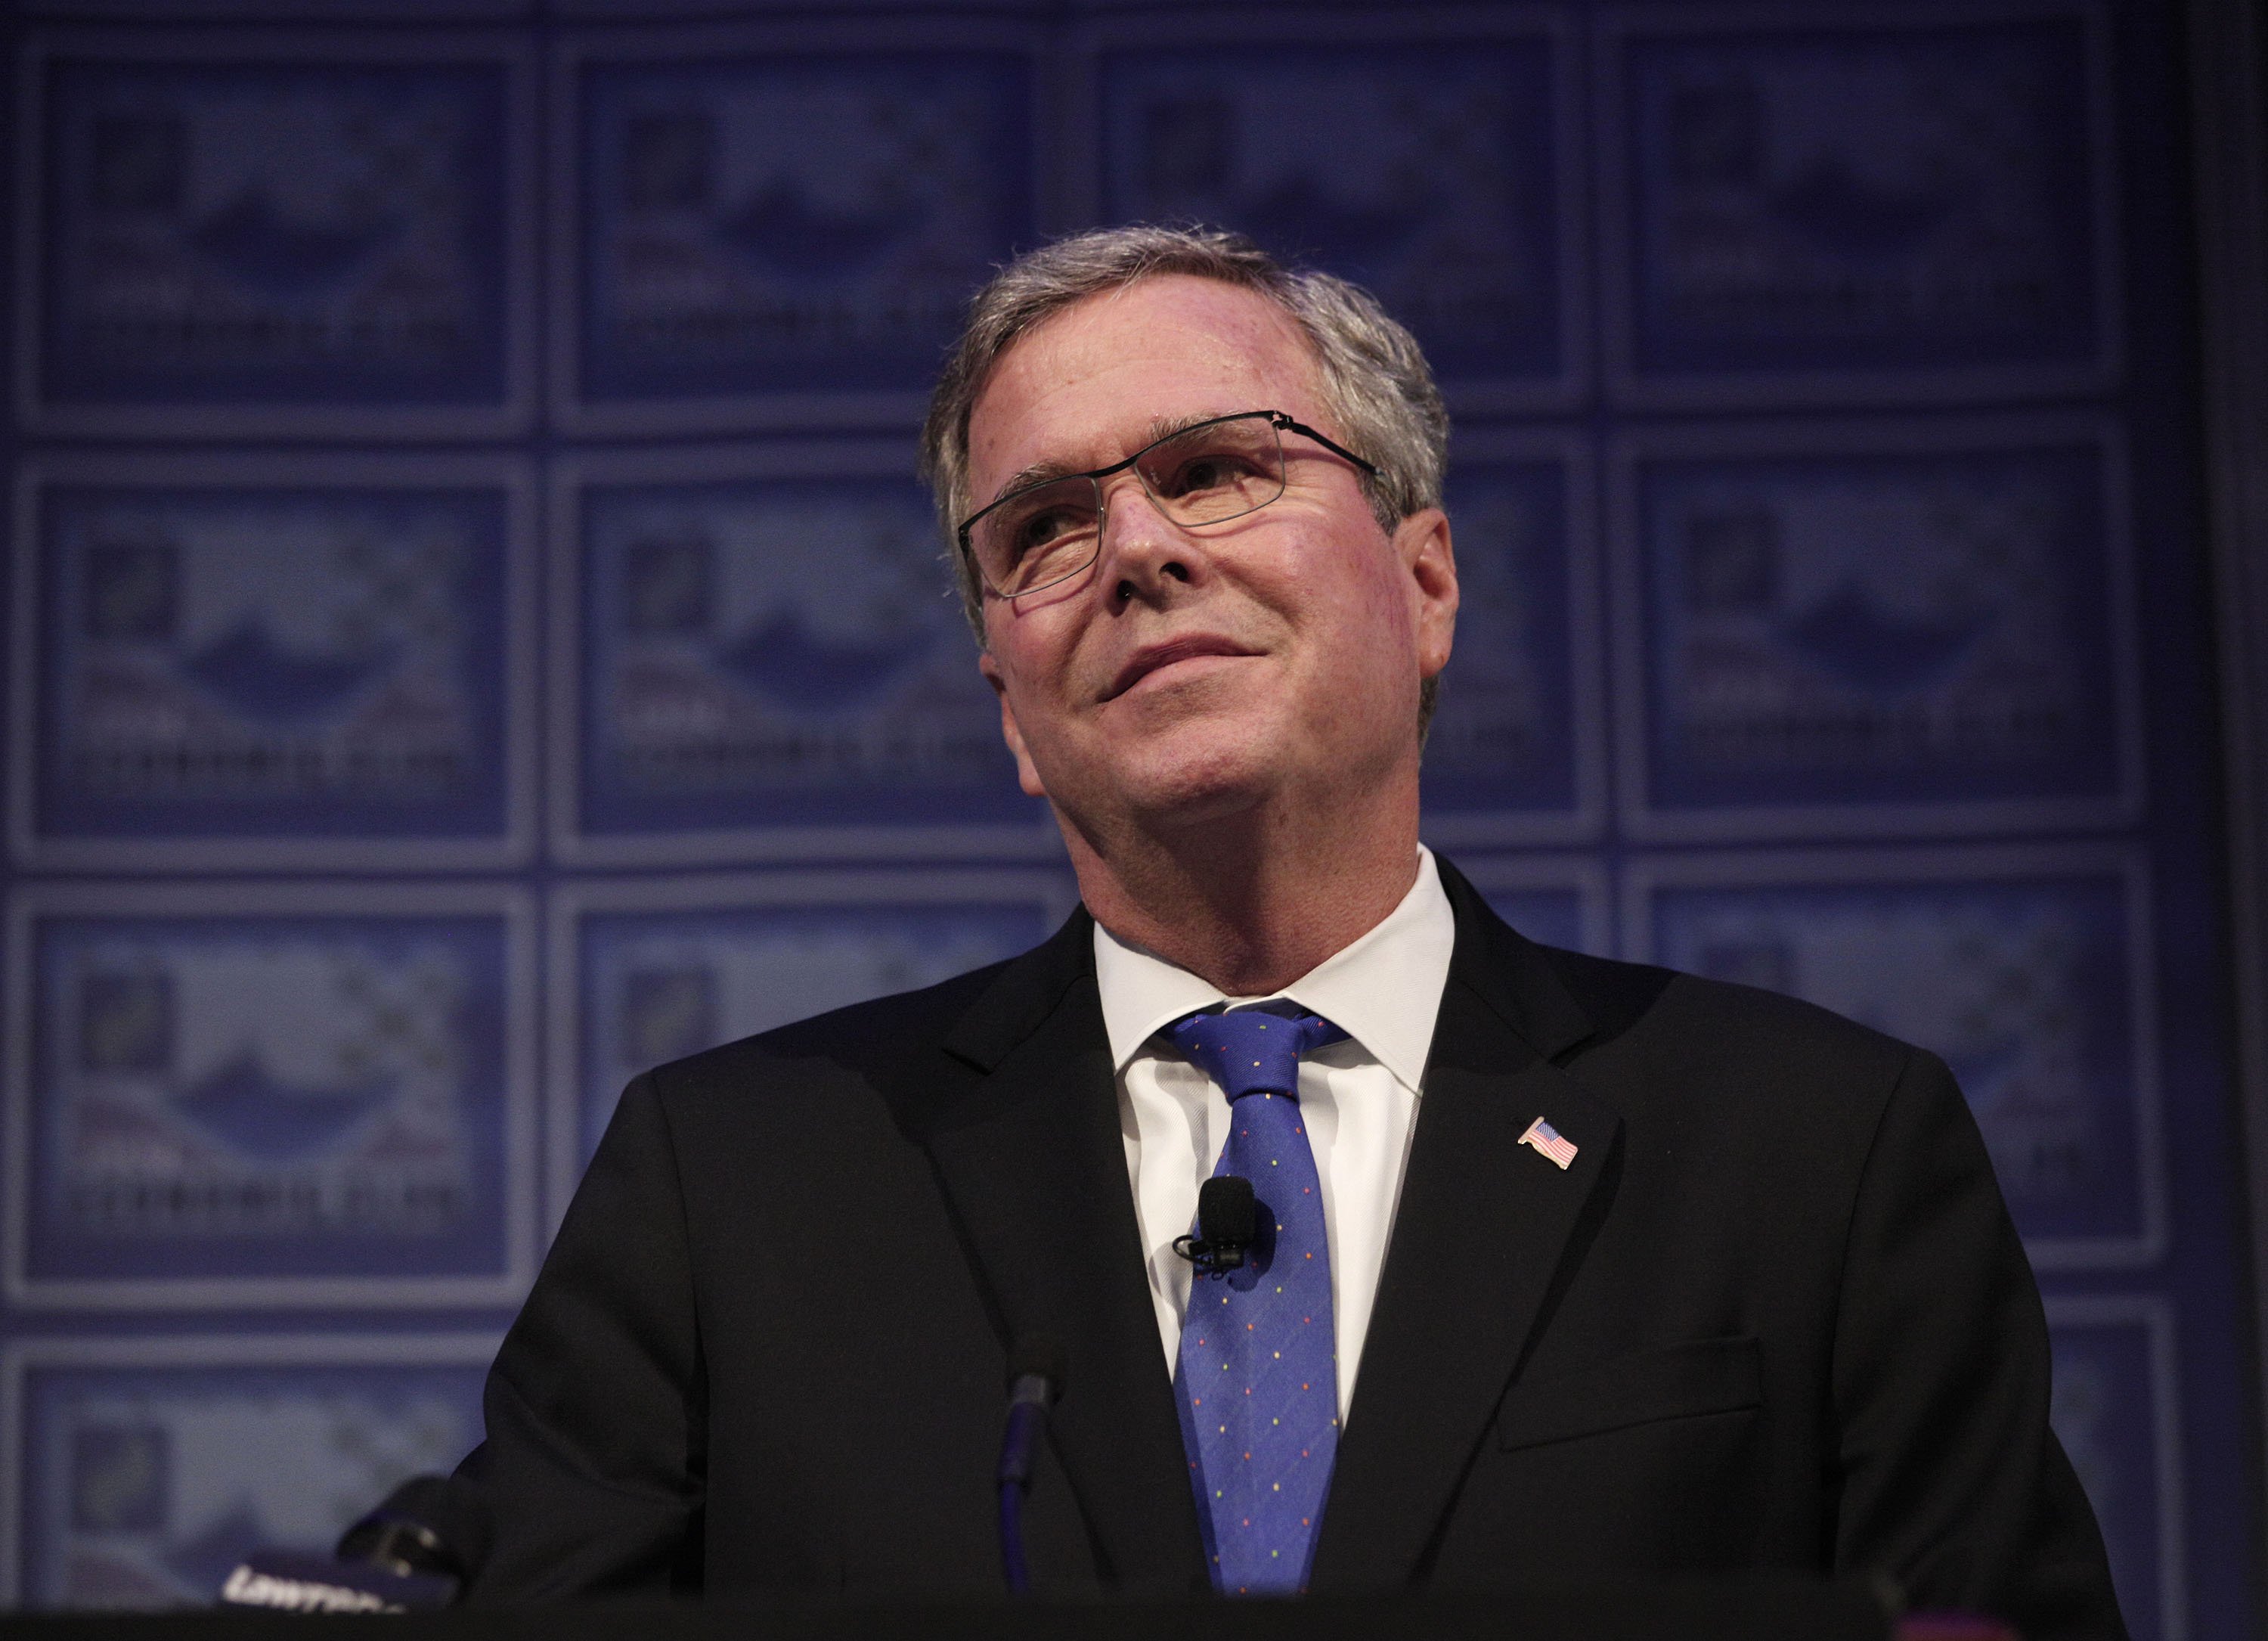 Former Florida Governor Jeb Bush speaks at the Detroit Economic Club on Feb. 4, 2015 in Detroit. (Bill Pugliano—Getty Images)